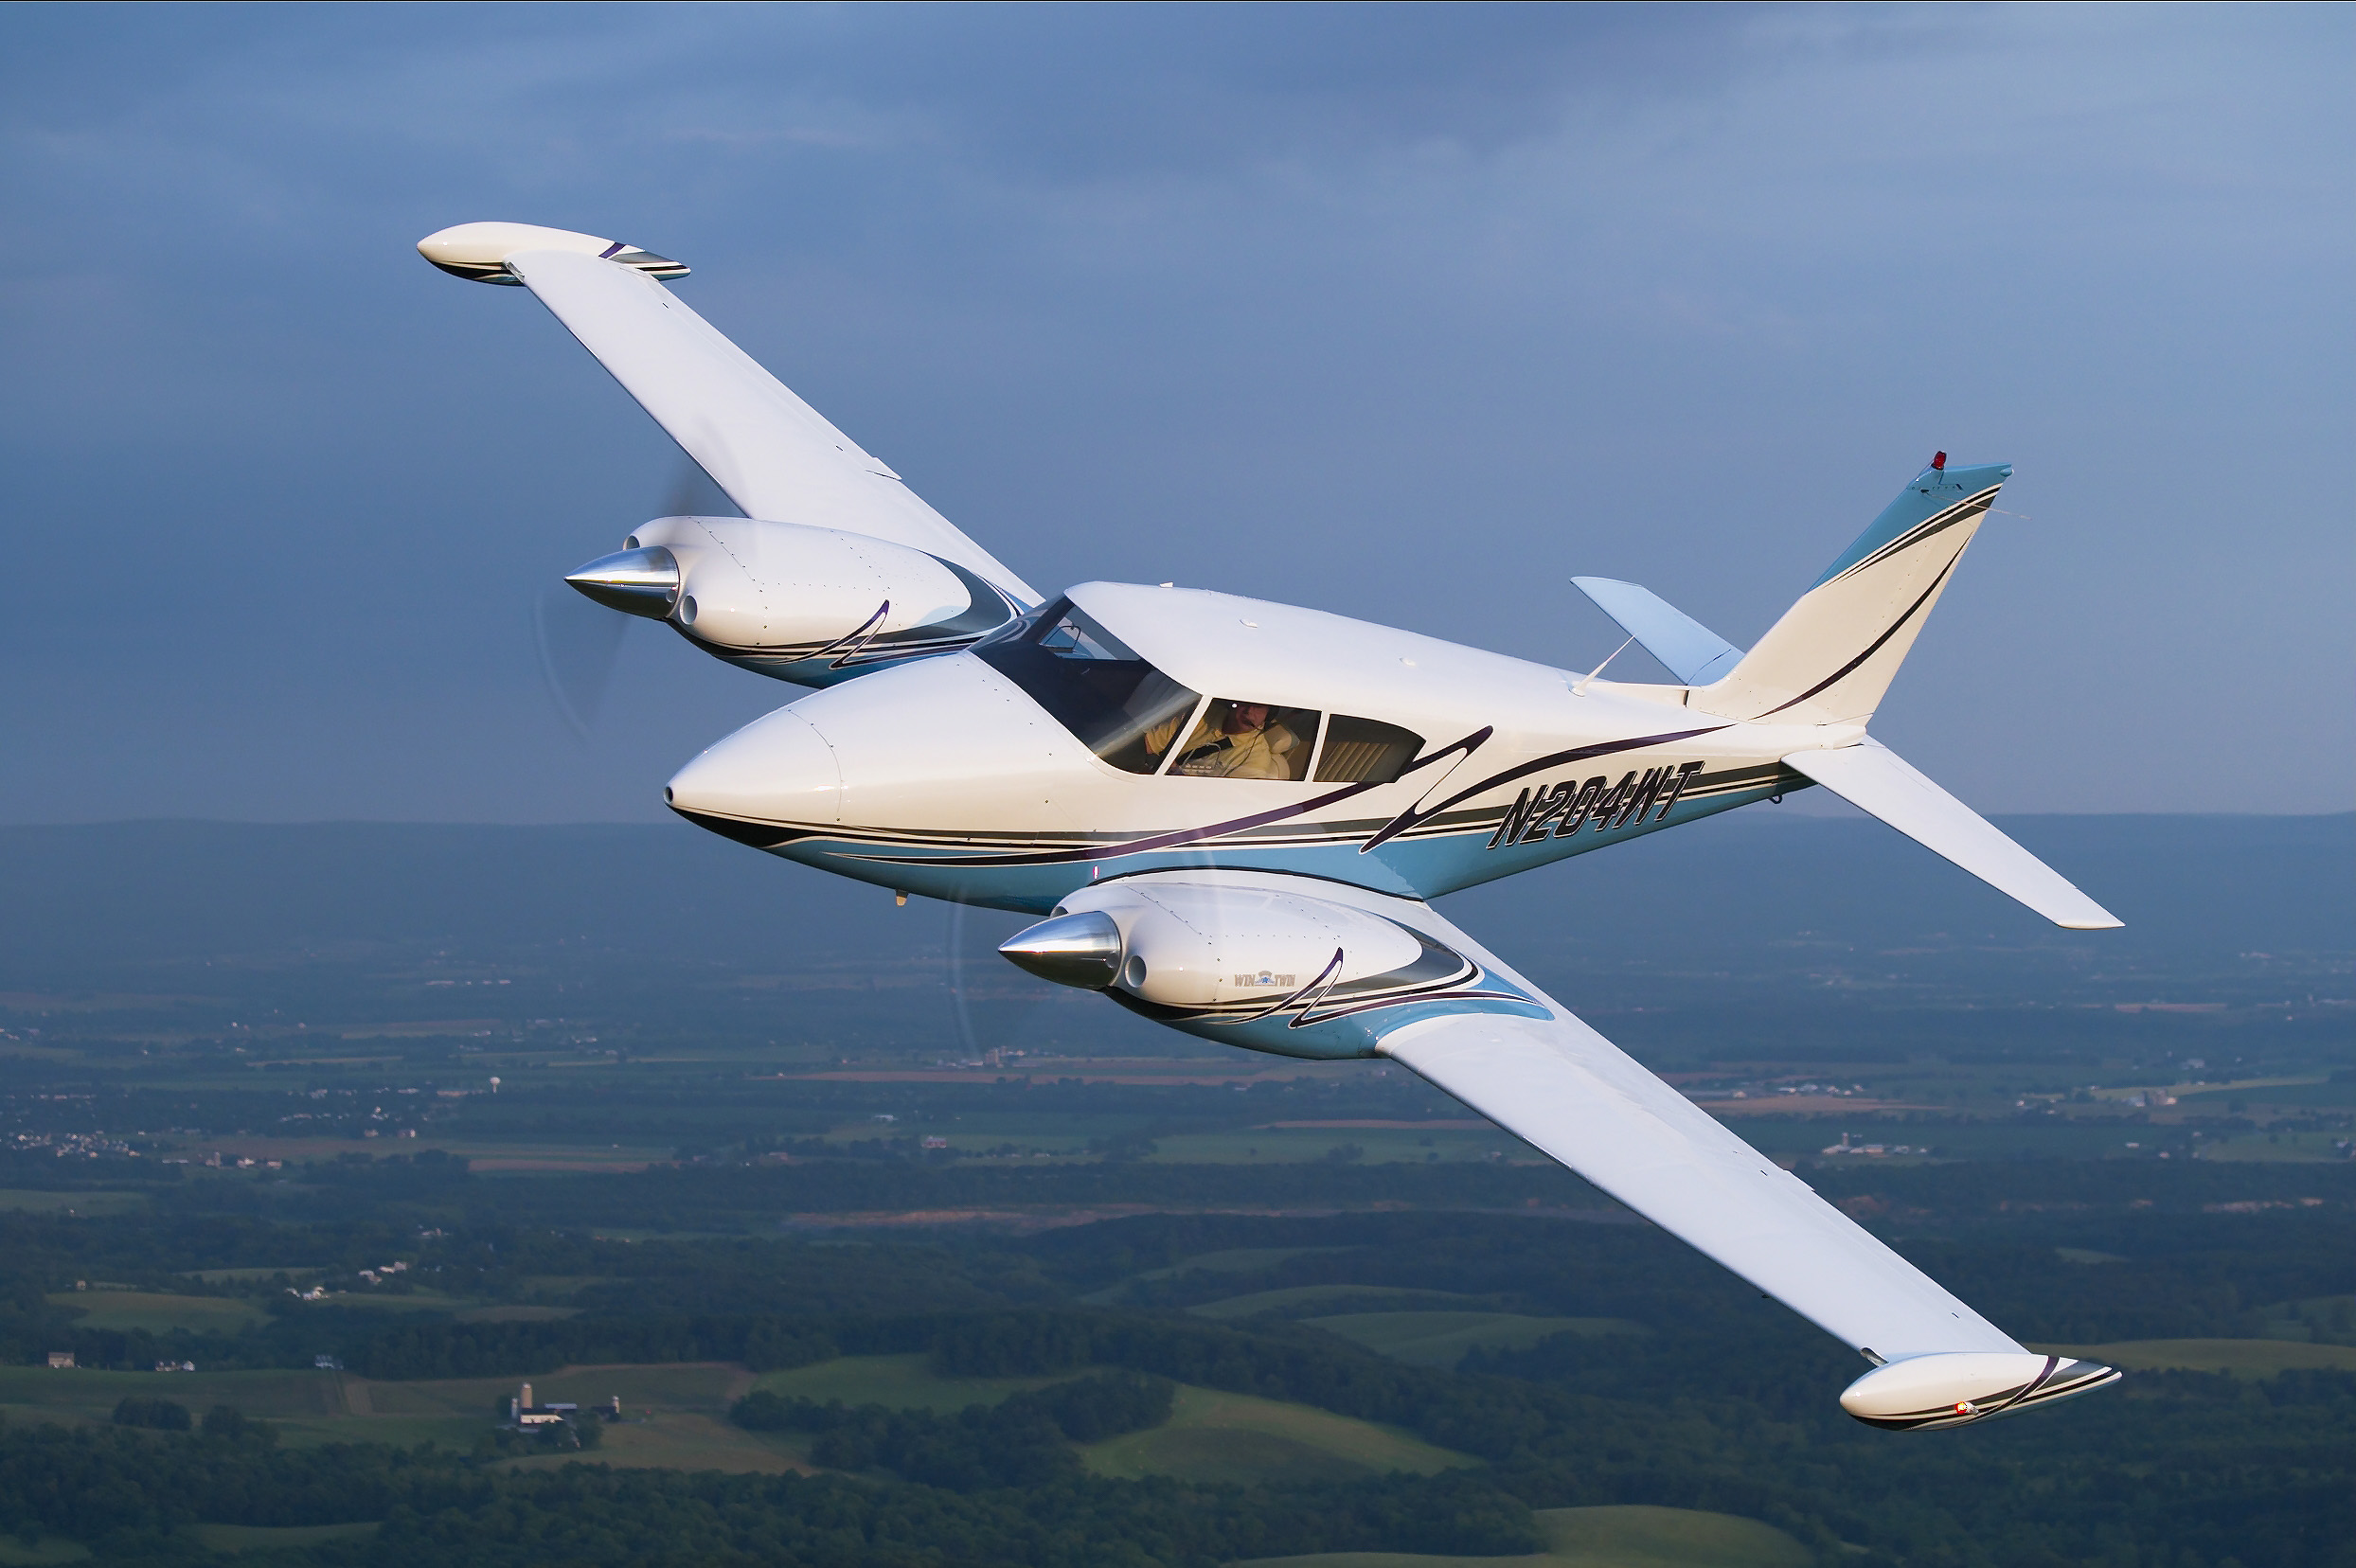 Pilots who complete the steps for BasicMed qualification can fly in aircraft weighing up to 6,000 lbs. gross takeoff weight, with up to six seats and carrying up to five passengers. They can fly day or night, VFR or IFR, at speeds up to 250 kts and at altitudes up to 18,000 feet msl. 